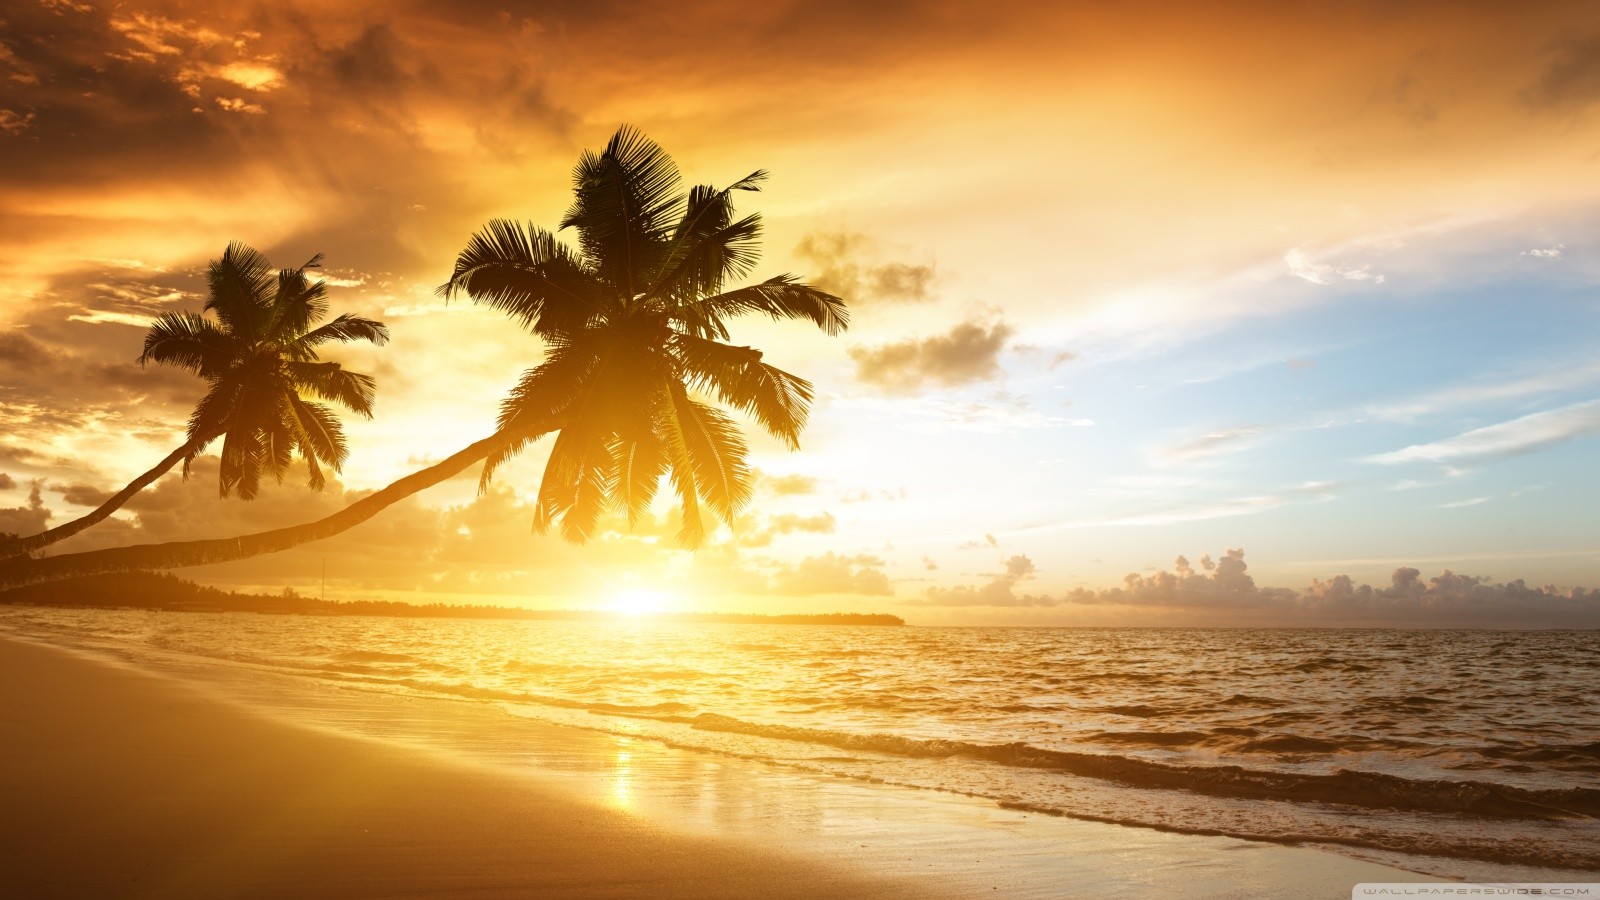 General 1600x900 sea palm trees yellow sunset beach outdoors sunlight sky watermarked